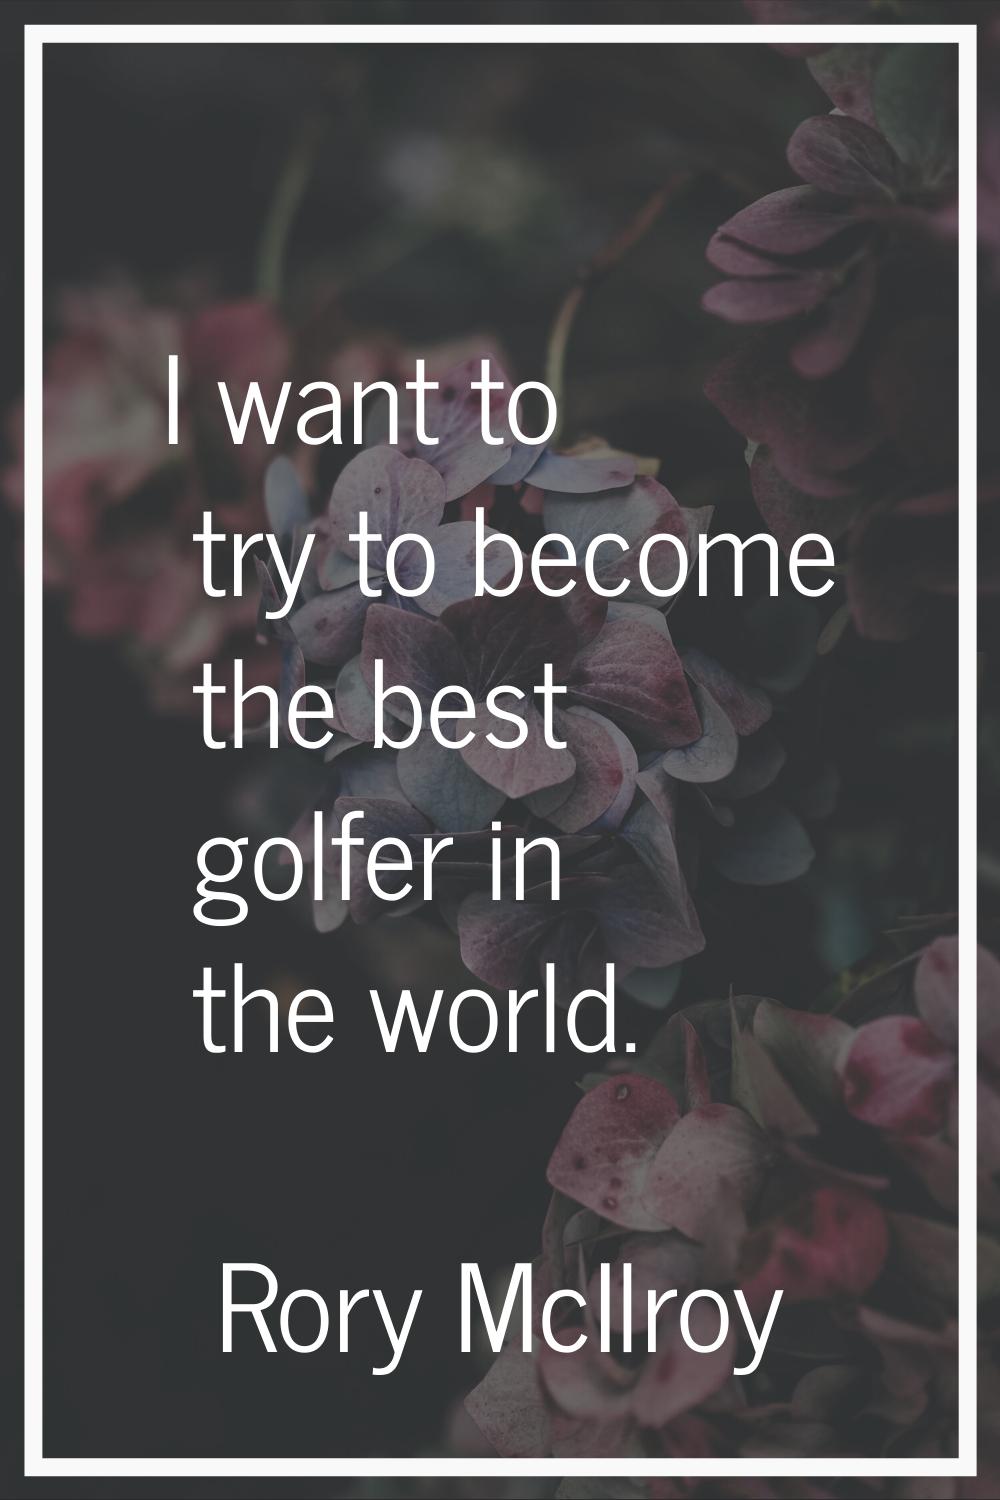 I want to try to become the best golfer in the world.